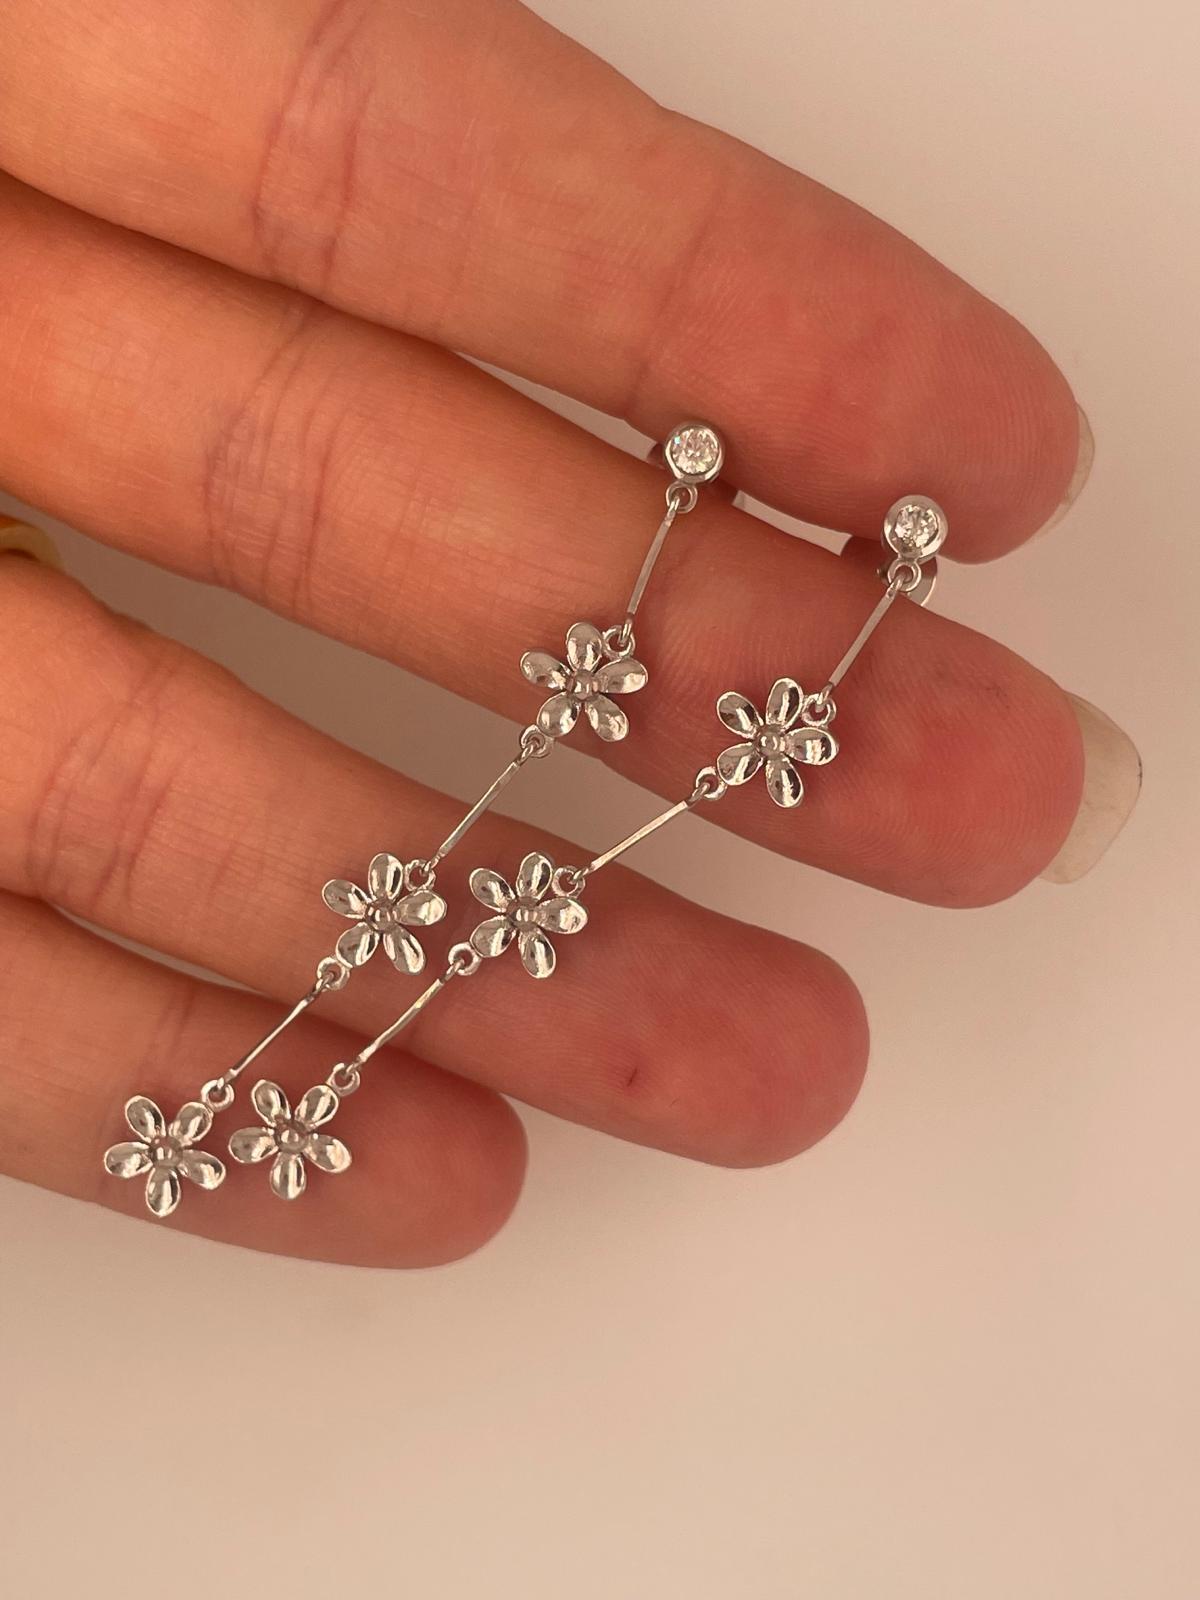 18k white gold solid
50mm length
Featuring 2 x FSI white round brilliant cut diamonds
2 x 2.30mm natural diamonds
Bezel set
Dangle drop earrings
Normal clip in butterfly back (if you prefer screw back please contact our concierge team)

Available in